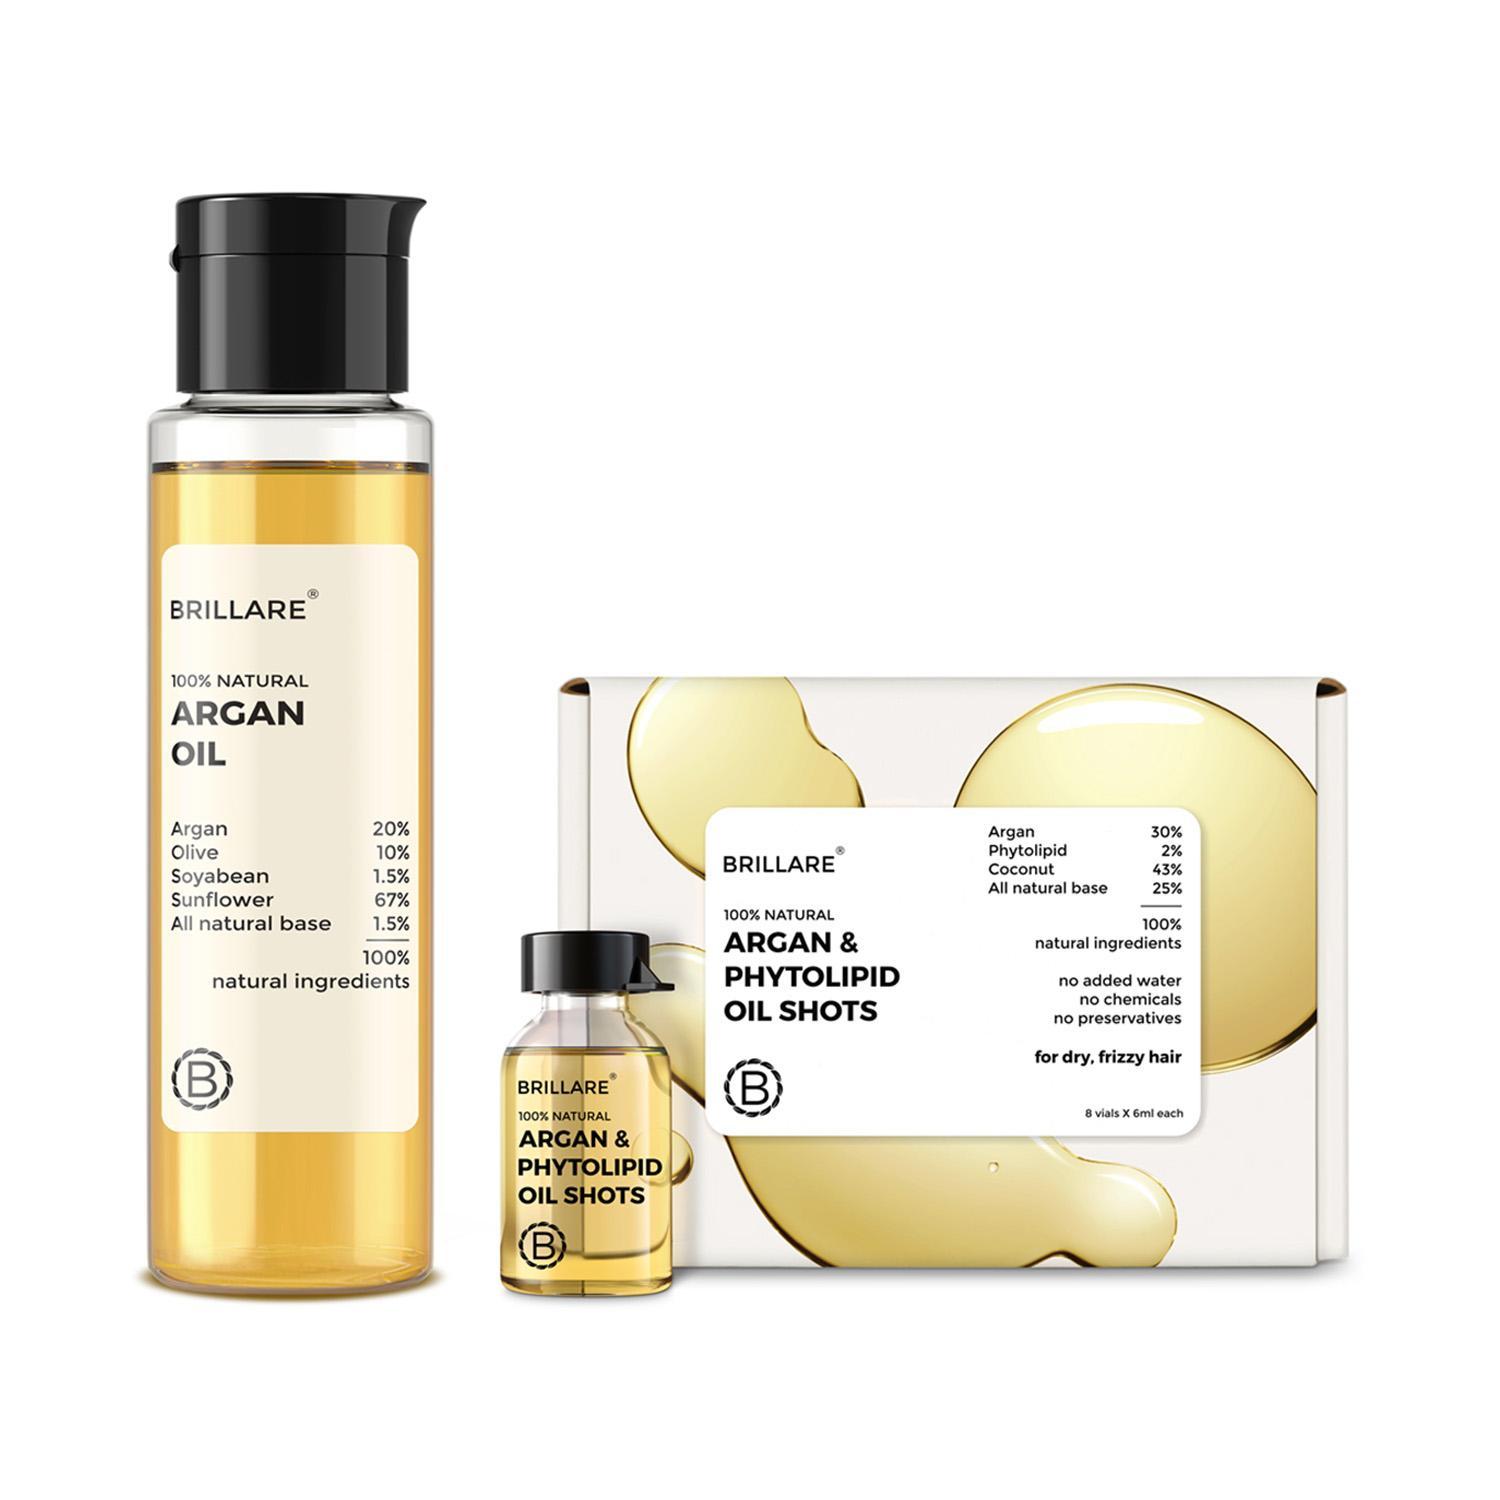 brillare argan & phytolipid oil shots (48ml) and argan oil (100ml) for dry, frizzy hair combo